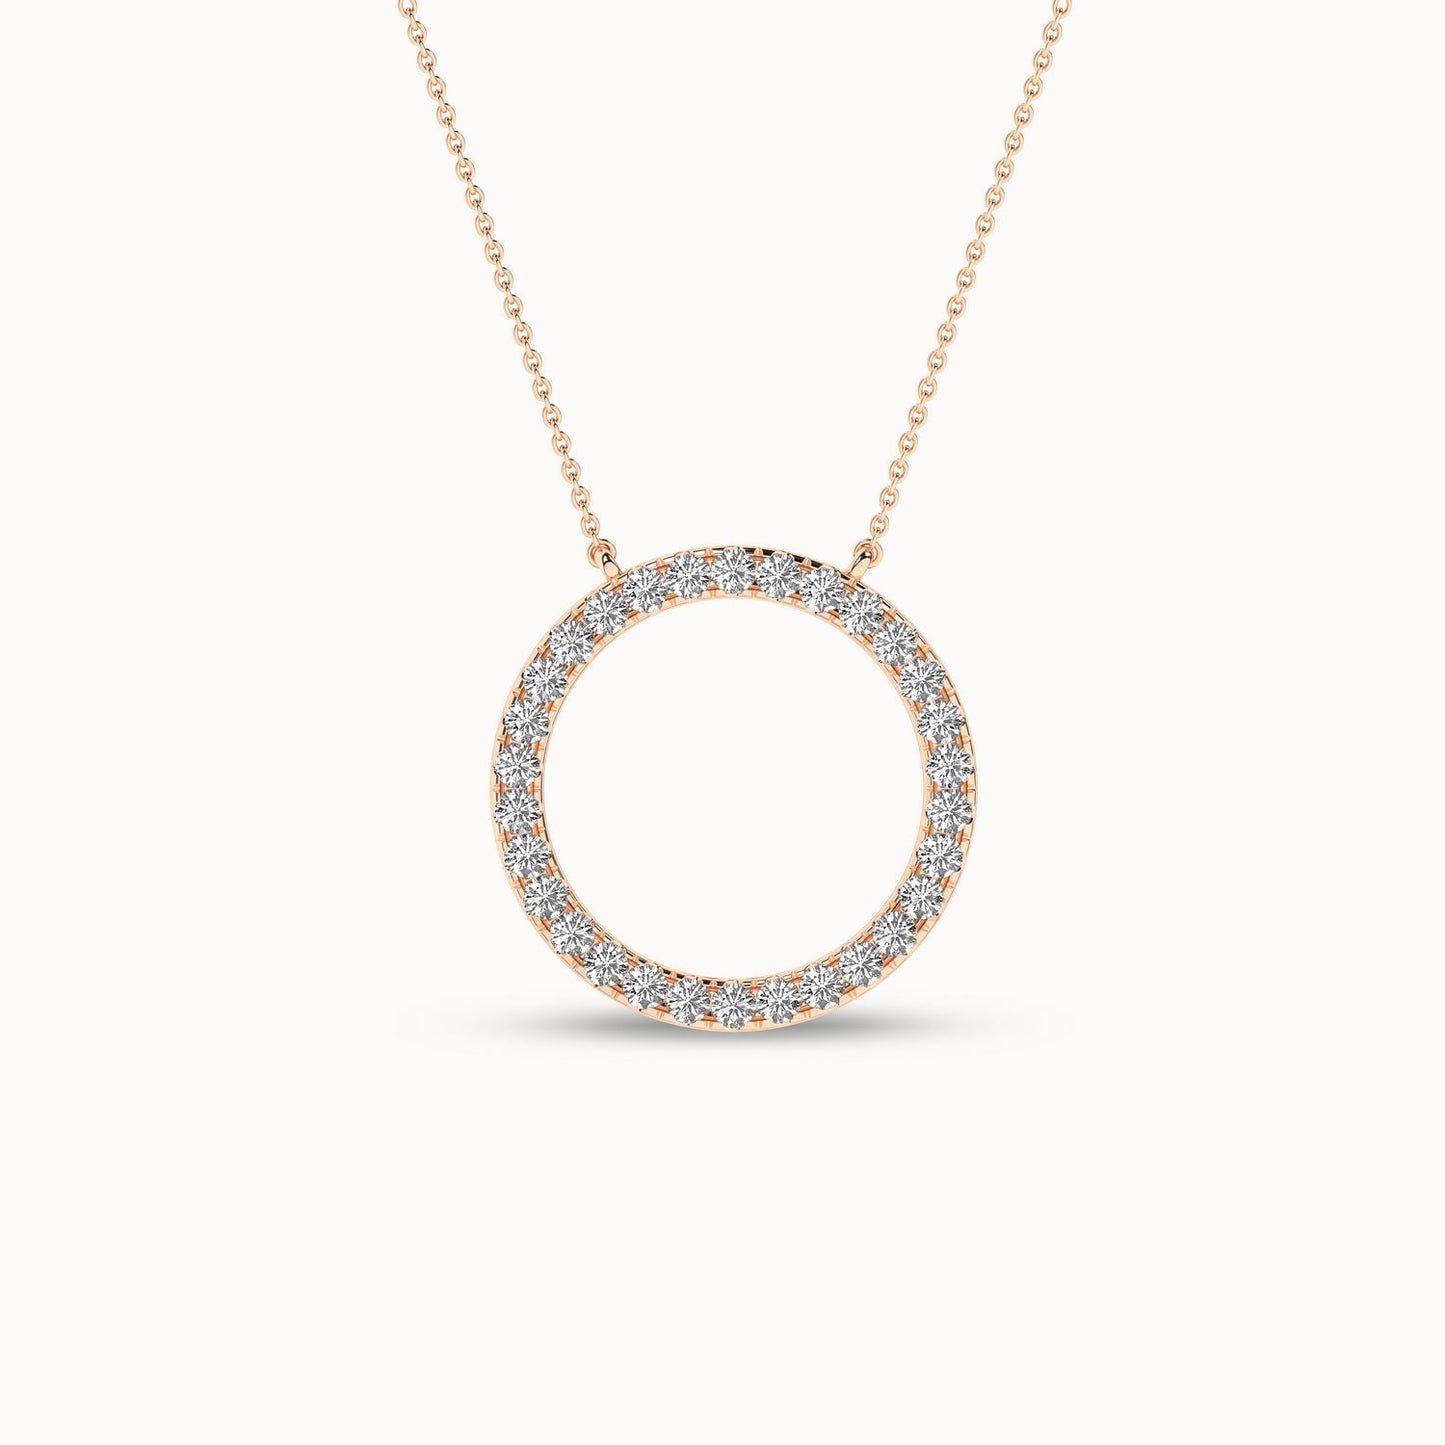 Circular Silhouette Necklace_Product Angle_1/3Ct. - 1